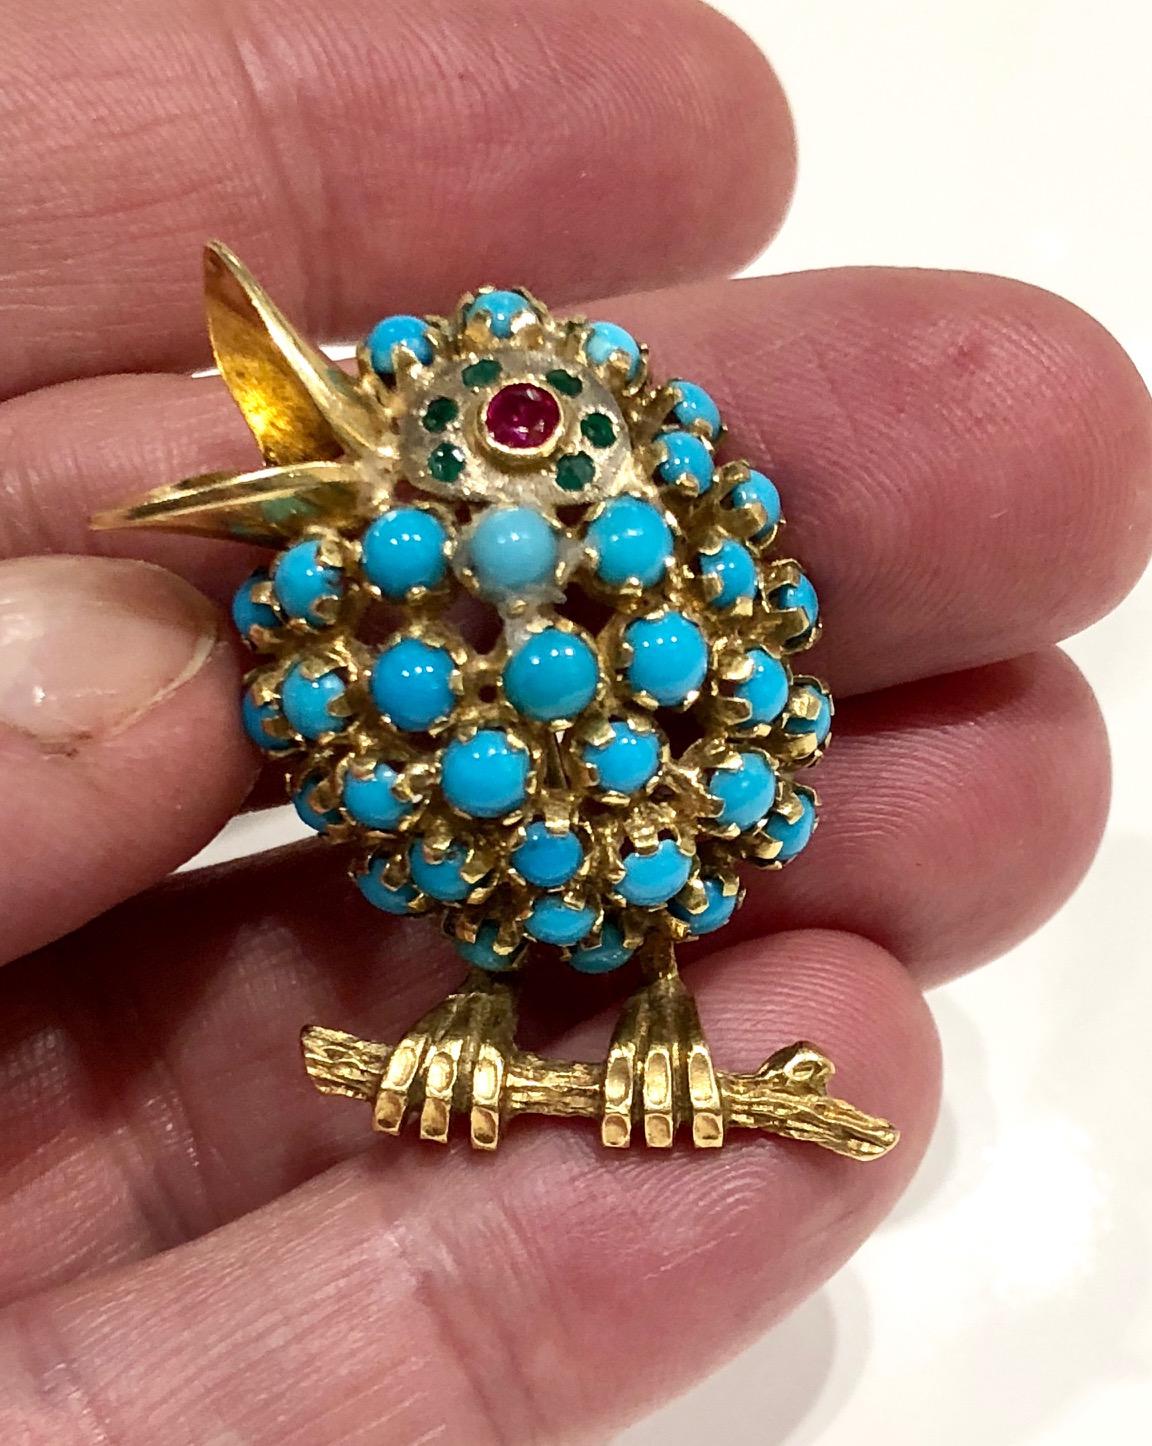 18k gold bird brooch set with turquoise with a ruby and emerald eye detail  .
circa 1960s